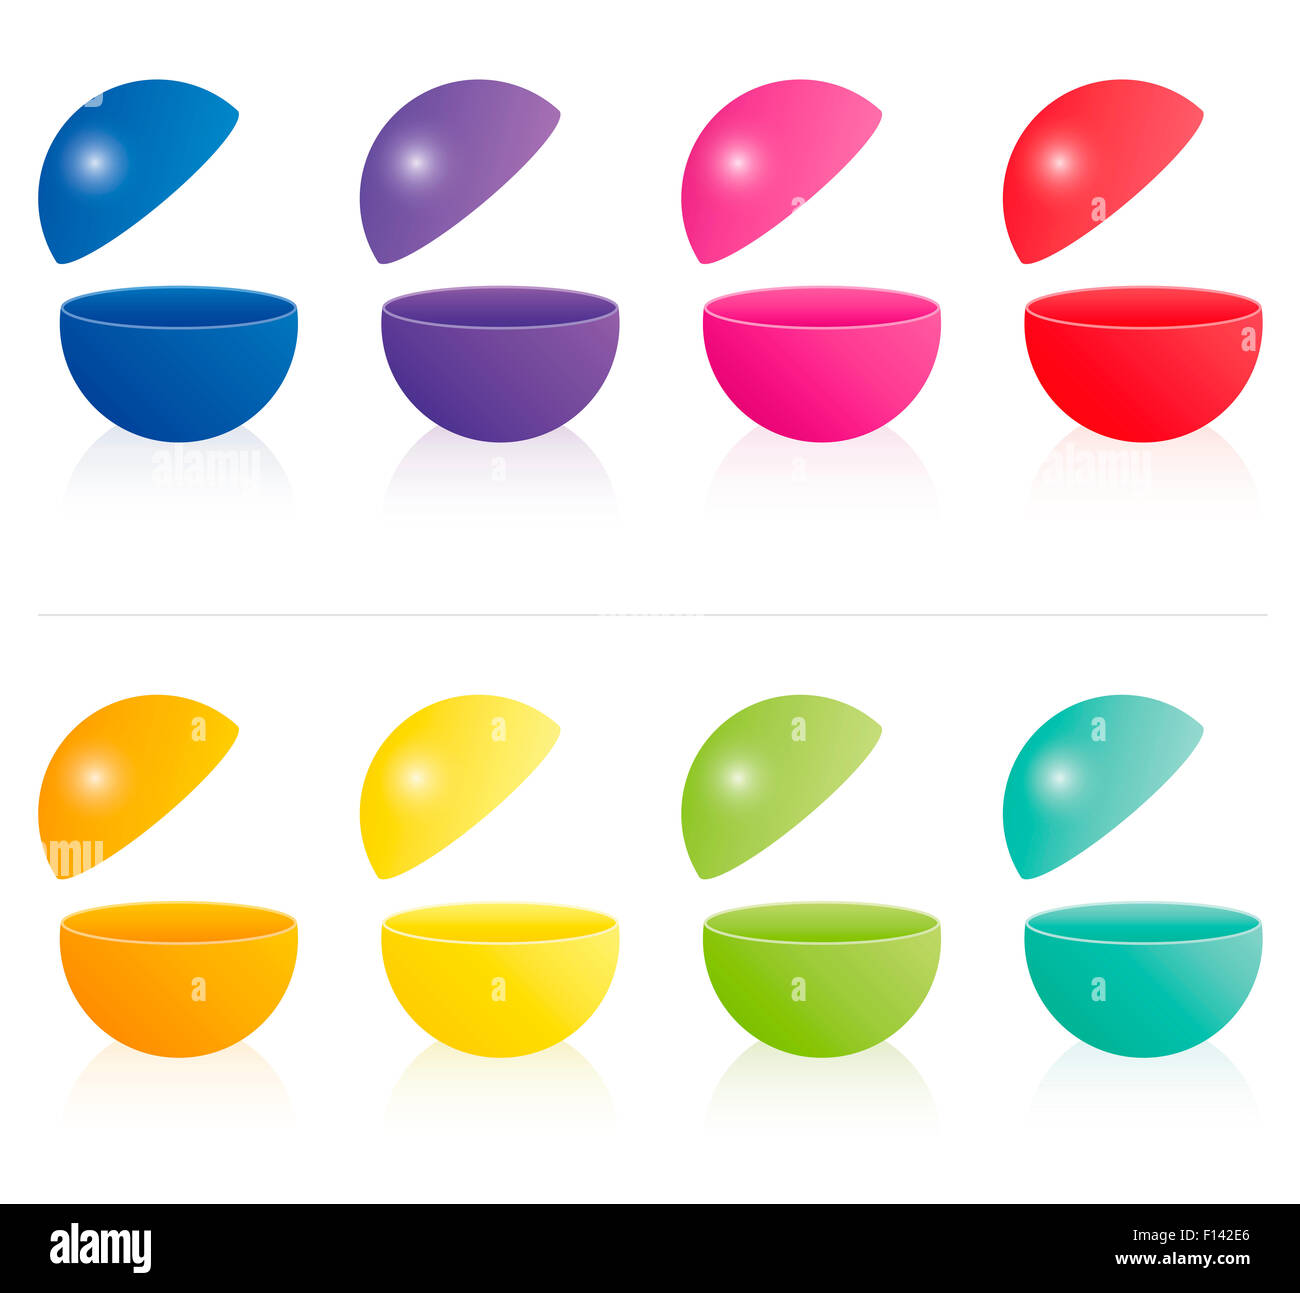 Empty hollow open fillable colorful balls. Three-dimensional illustration on white background. Stock Photo